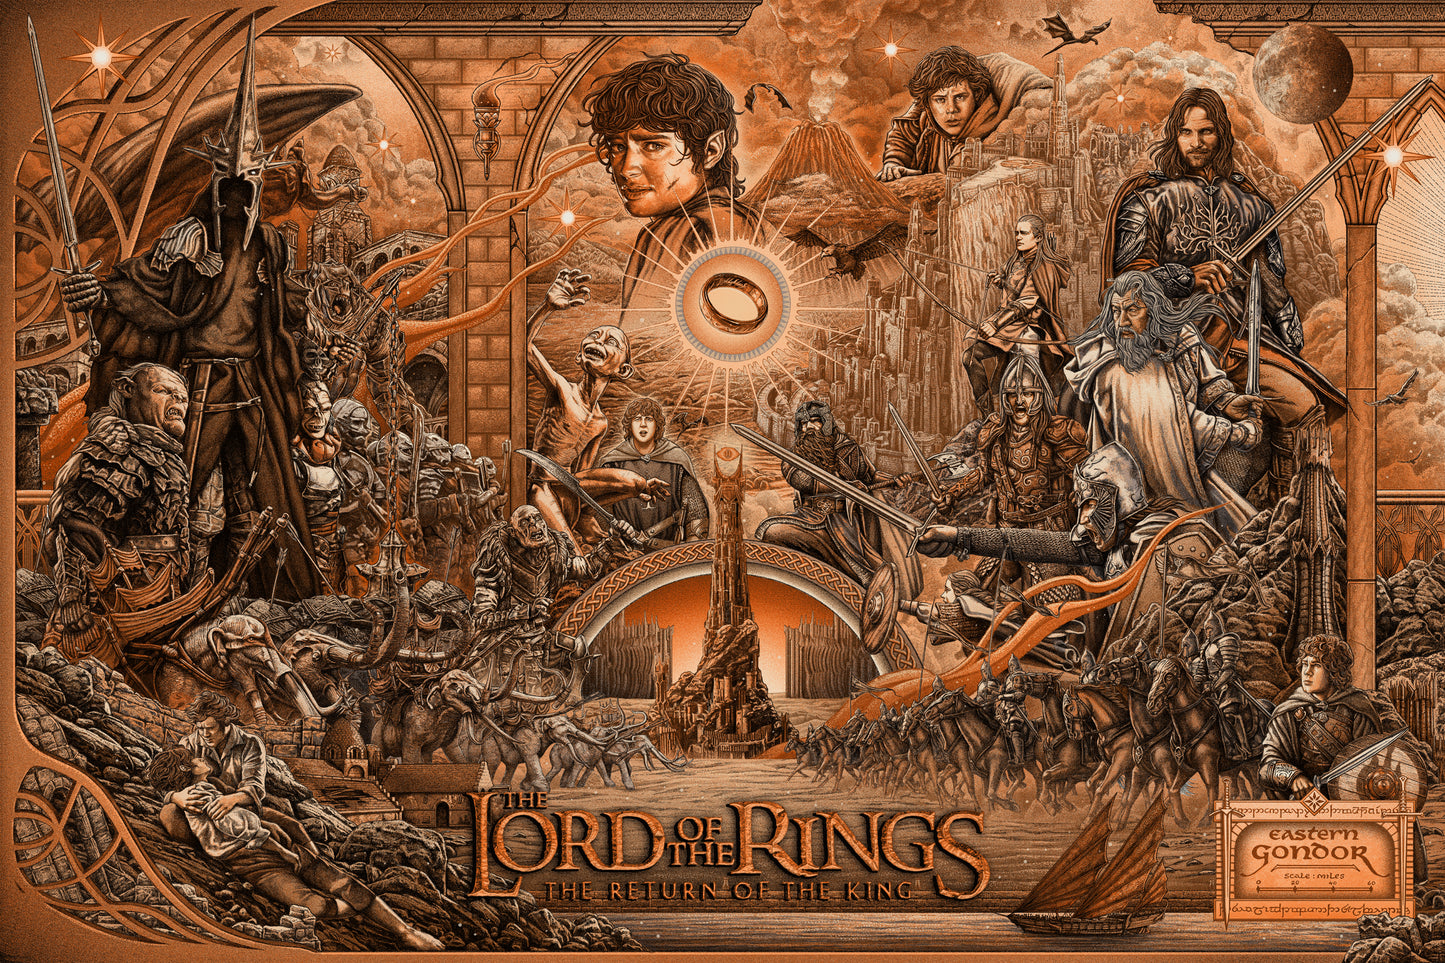 Ise Ananphada "The Lord of the Rings: The Return of the King" Variant